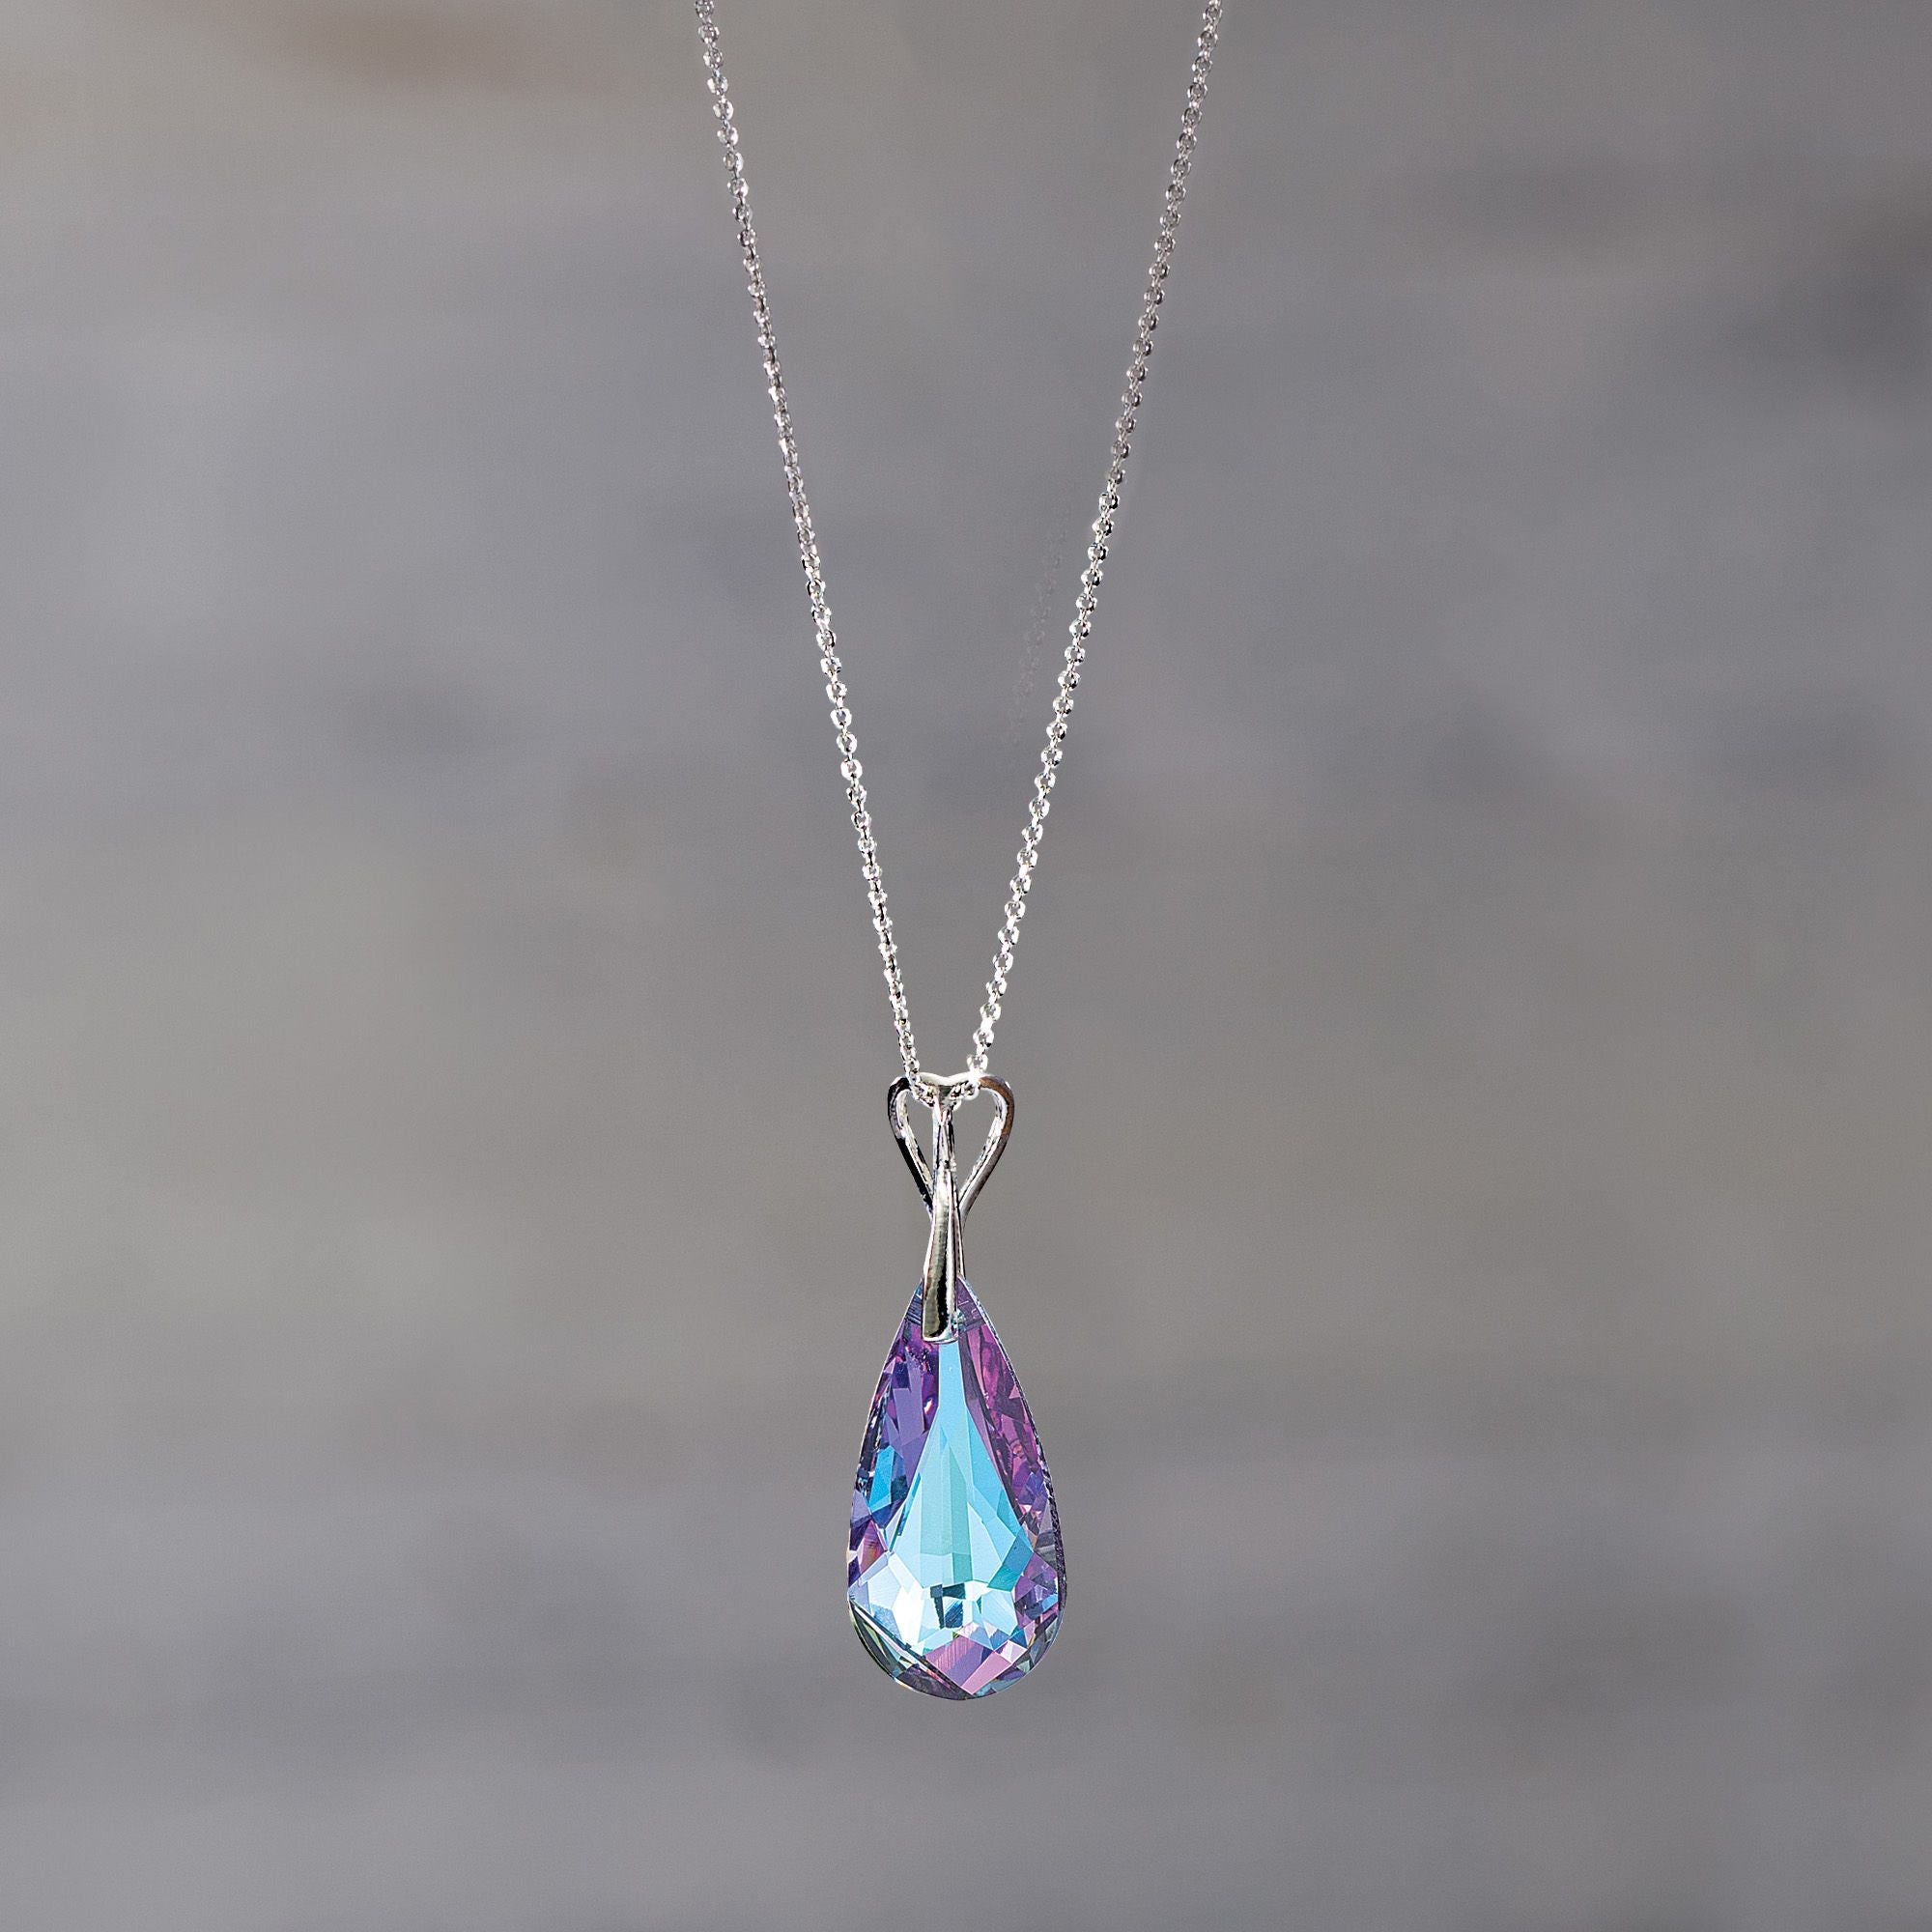 Mystical Iridescence Crystal Necklace